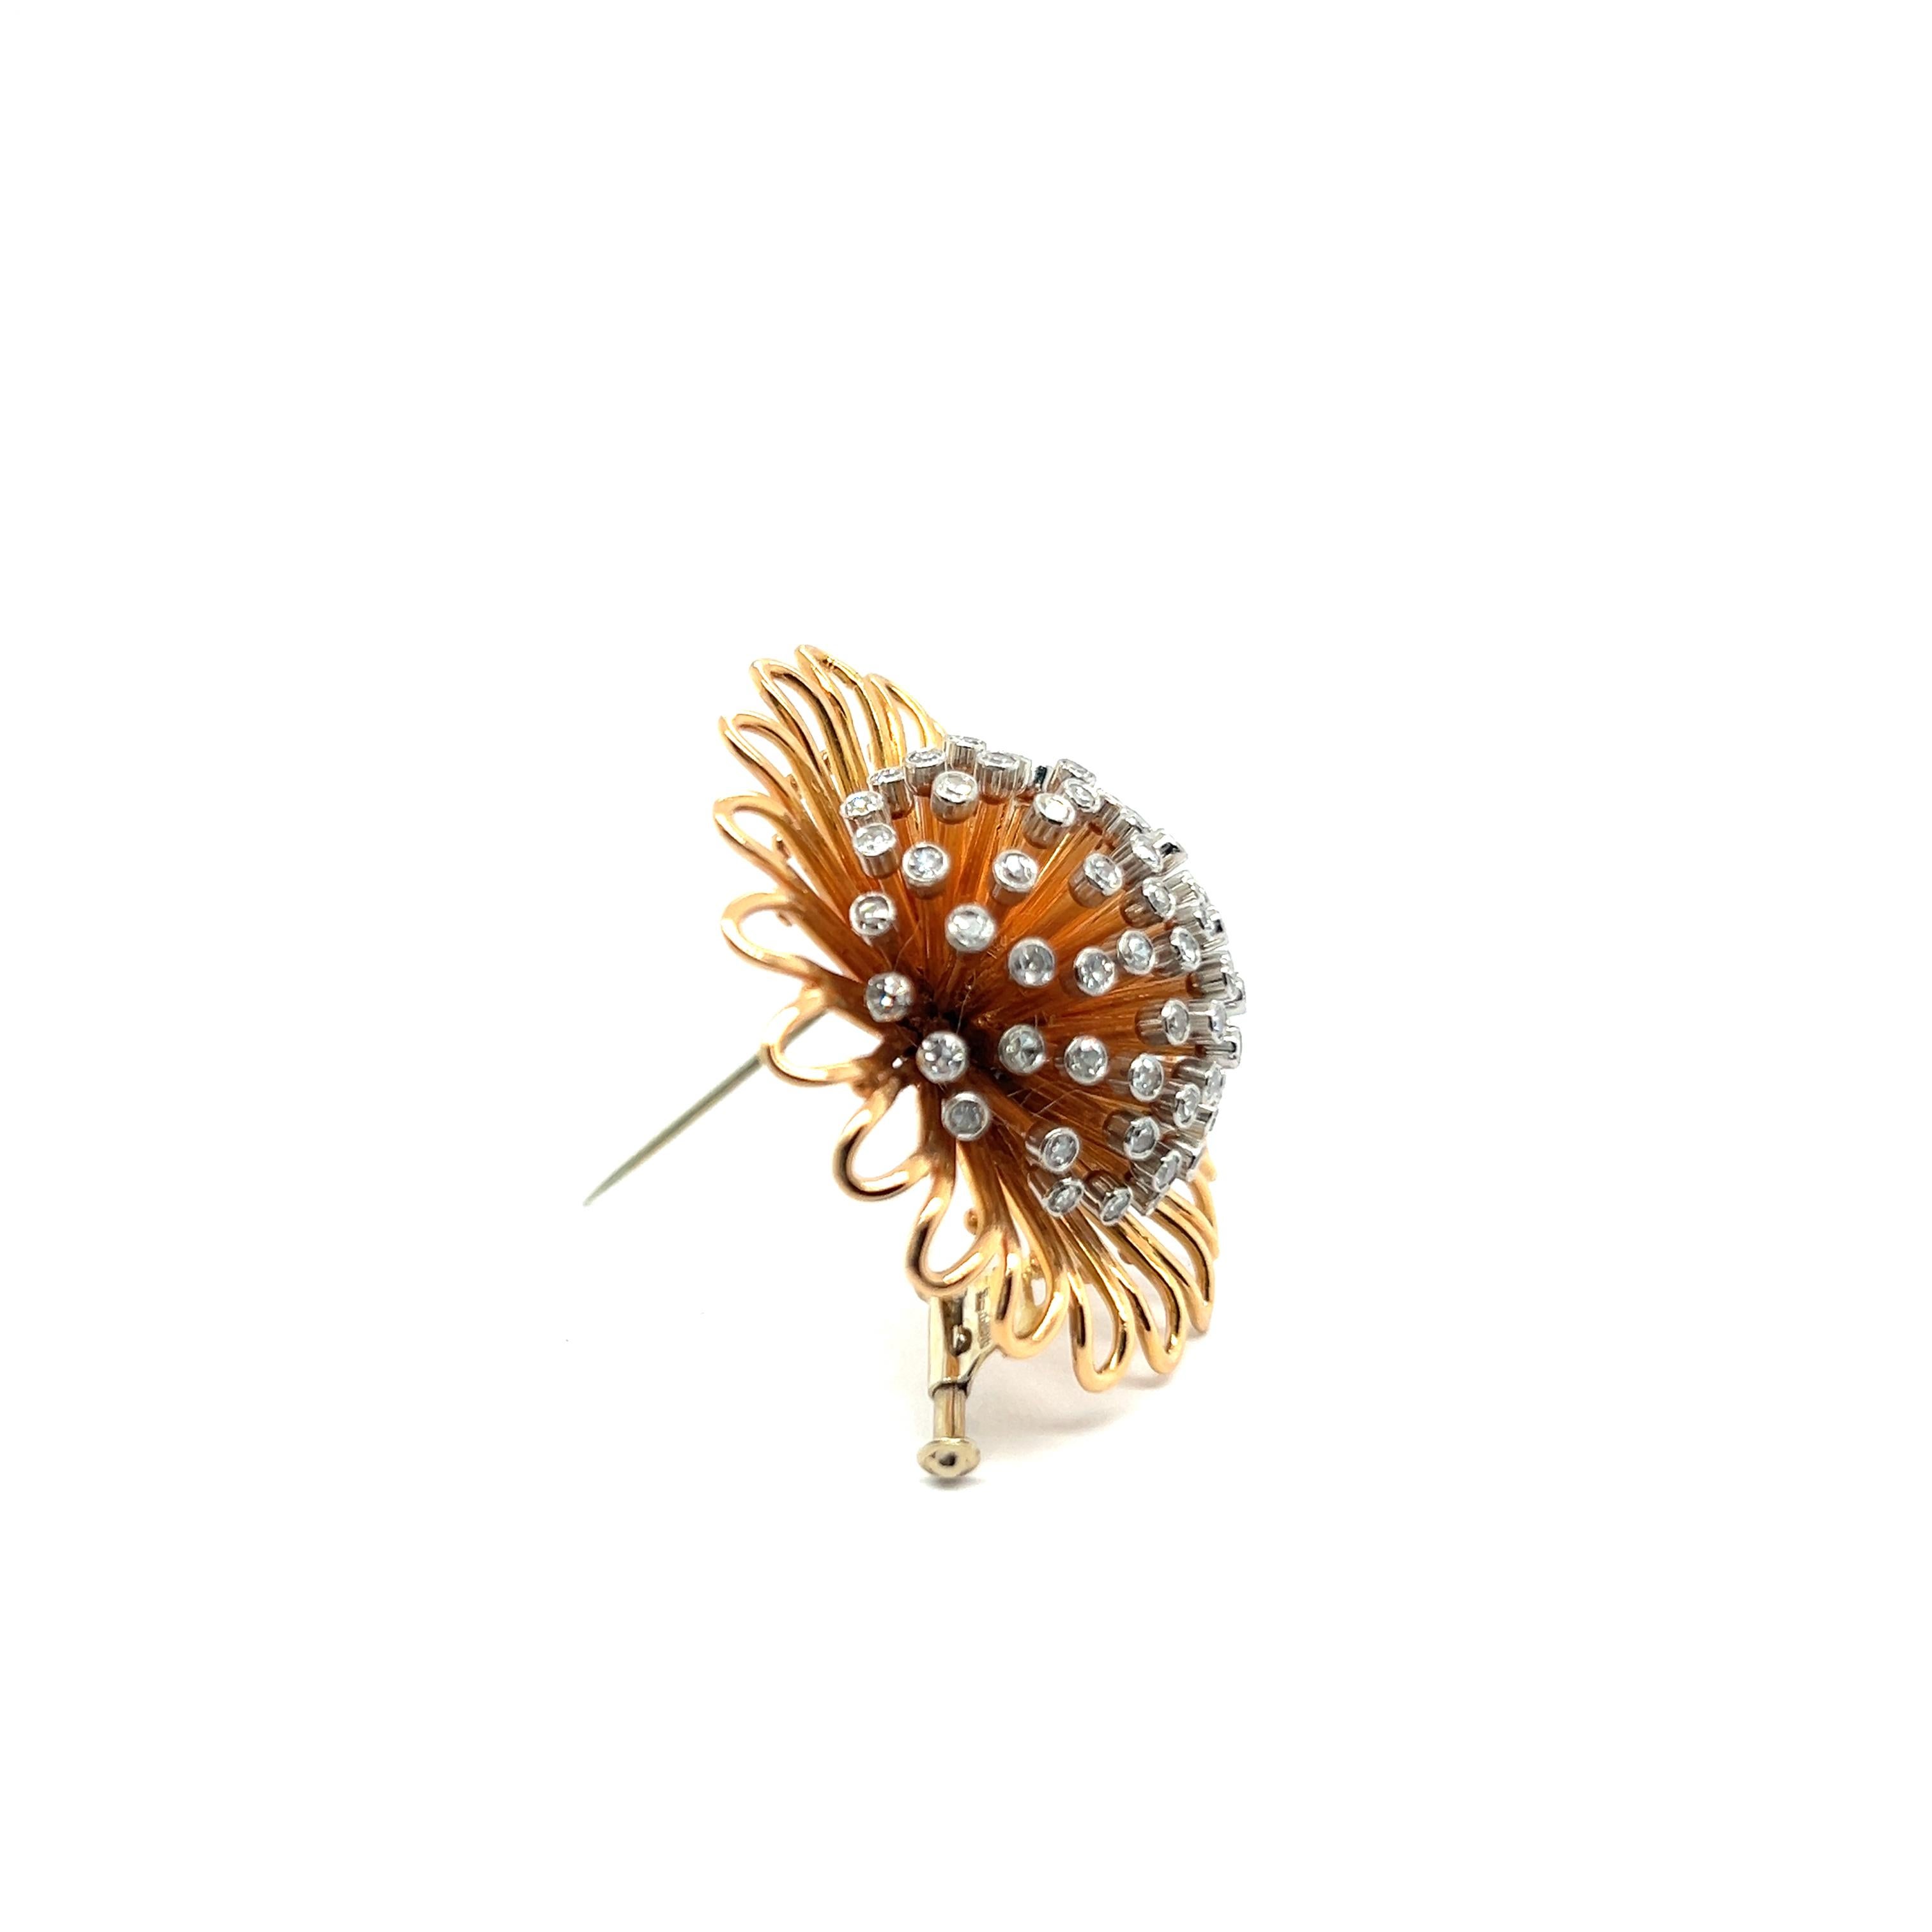 Brilliant Cut Brooch with Diamonds in 18 Karat Red Gold by Meinrad Burch For Sale